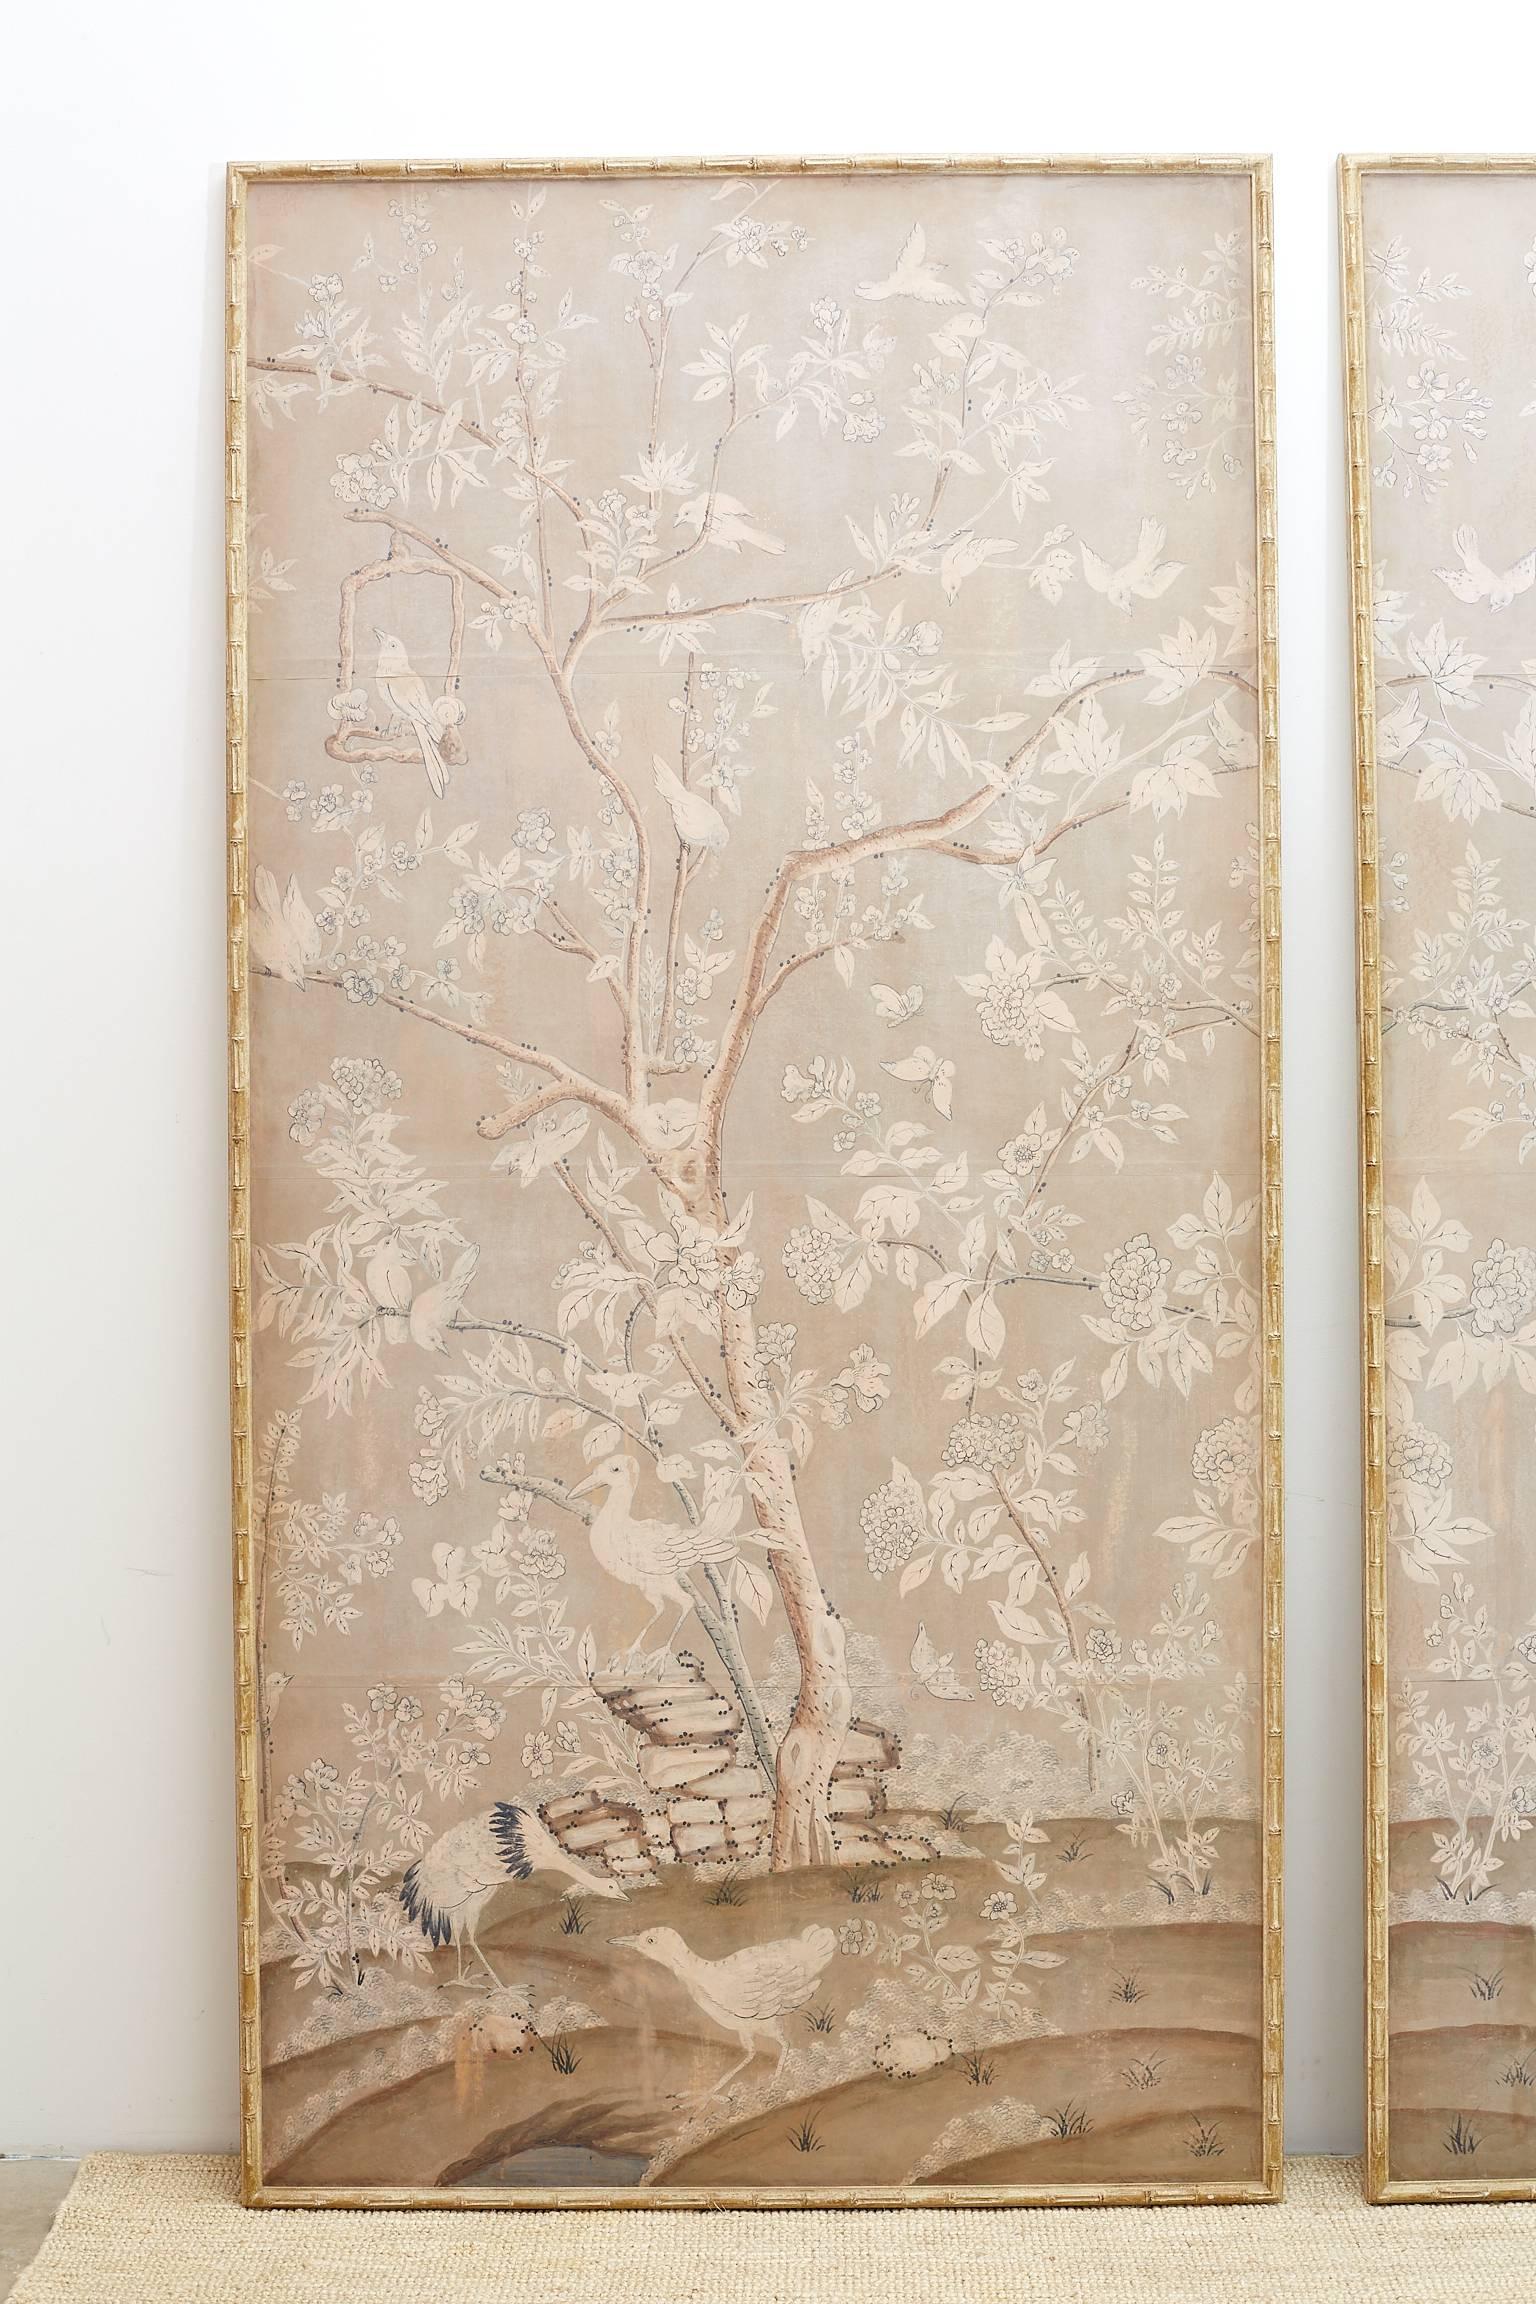 Monumental Chinoiserie Wallpaper Panels by Dennis and Leen 4